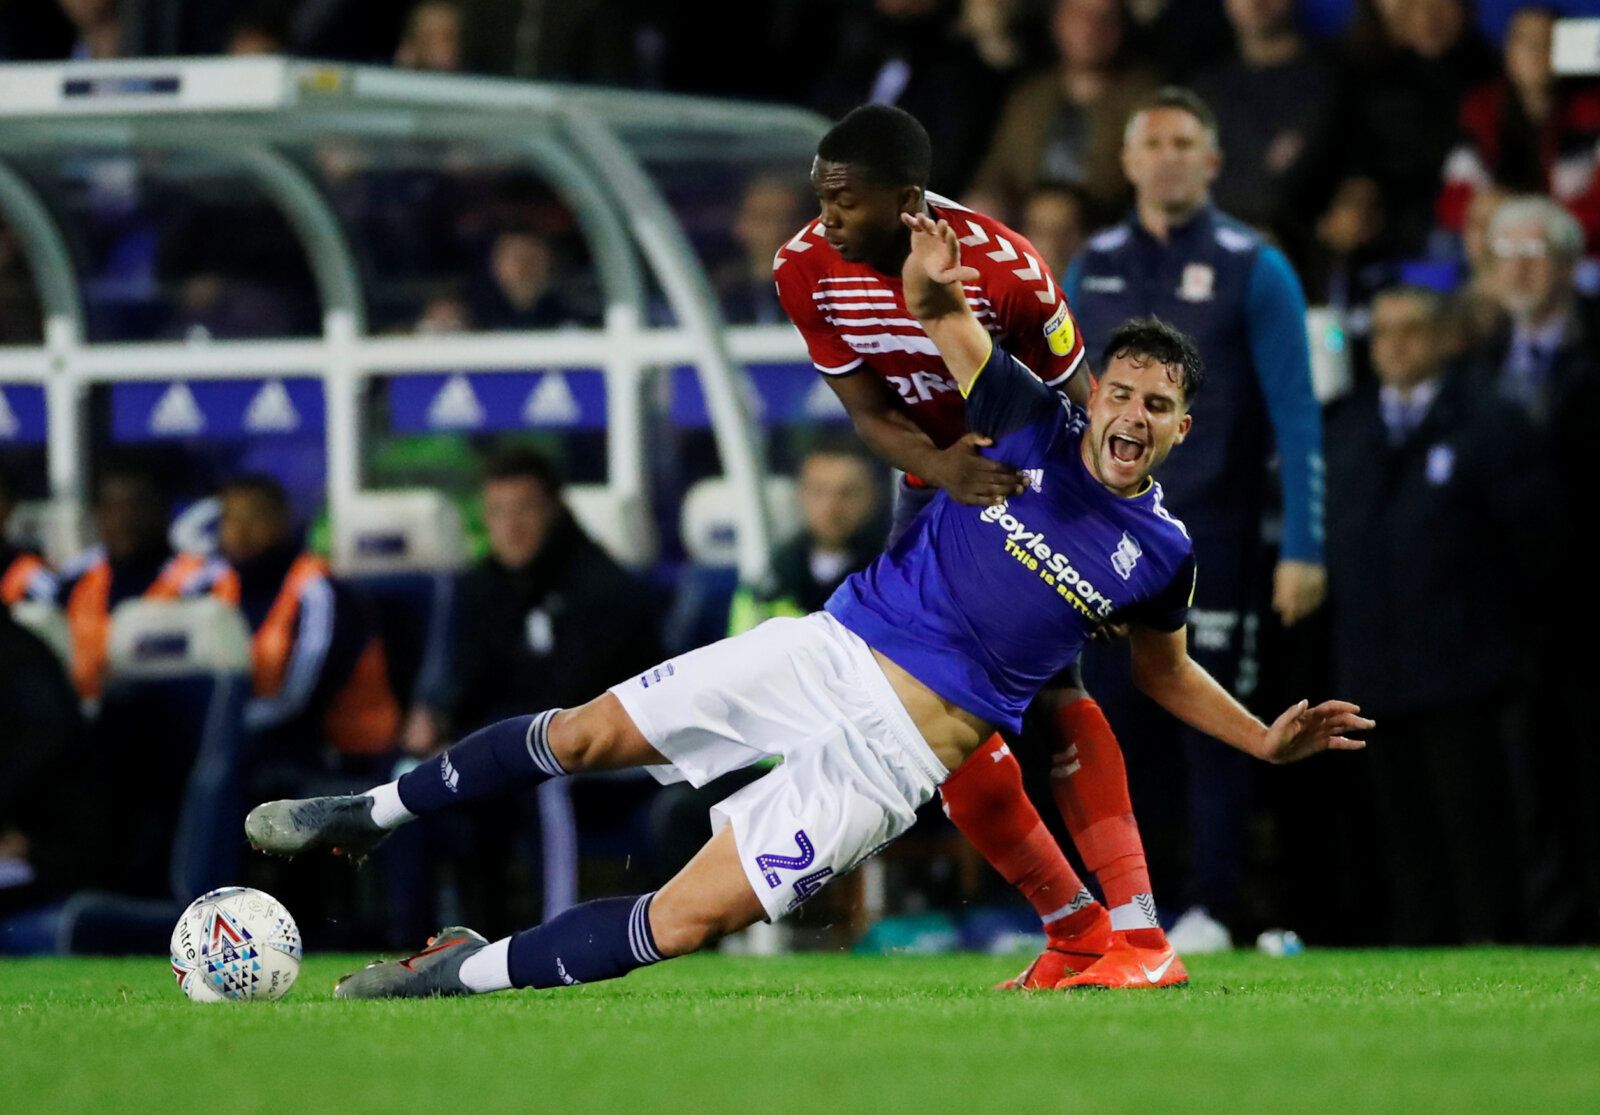 Soccer Football - Championship - Birmingham City v Middlesbrough - St Andrew's, Birmingham, Britain -October 4, 2019   Middlesbrough's Anfernee Dijksteel fouls Birmingham's Alvaro Gimenez and is subsequently shown a yellow card   Action Images/Andrew Boyers    EDITORIAL USE ONLY. No use with unauthorized audio, video, data, fixture lists, club/league logos or 